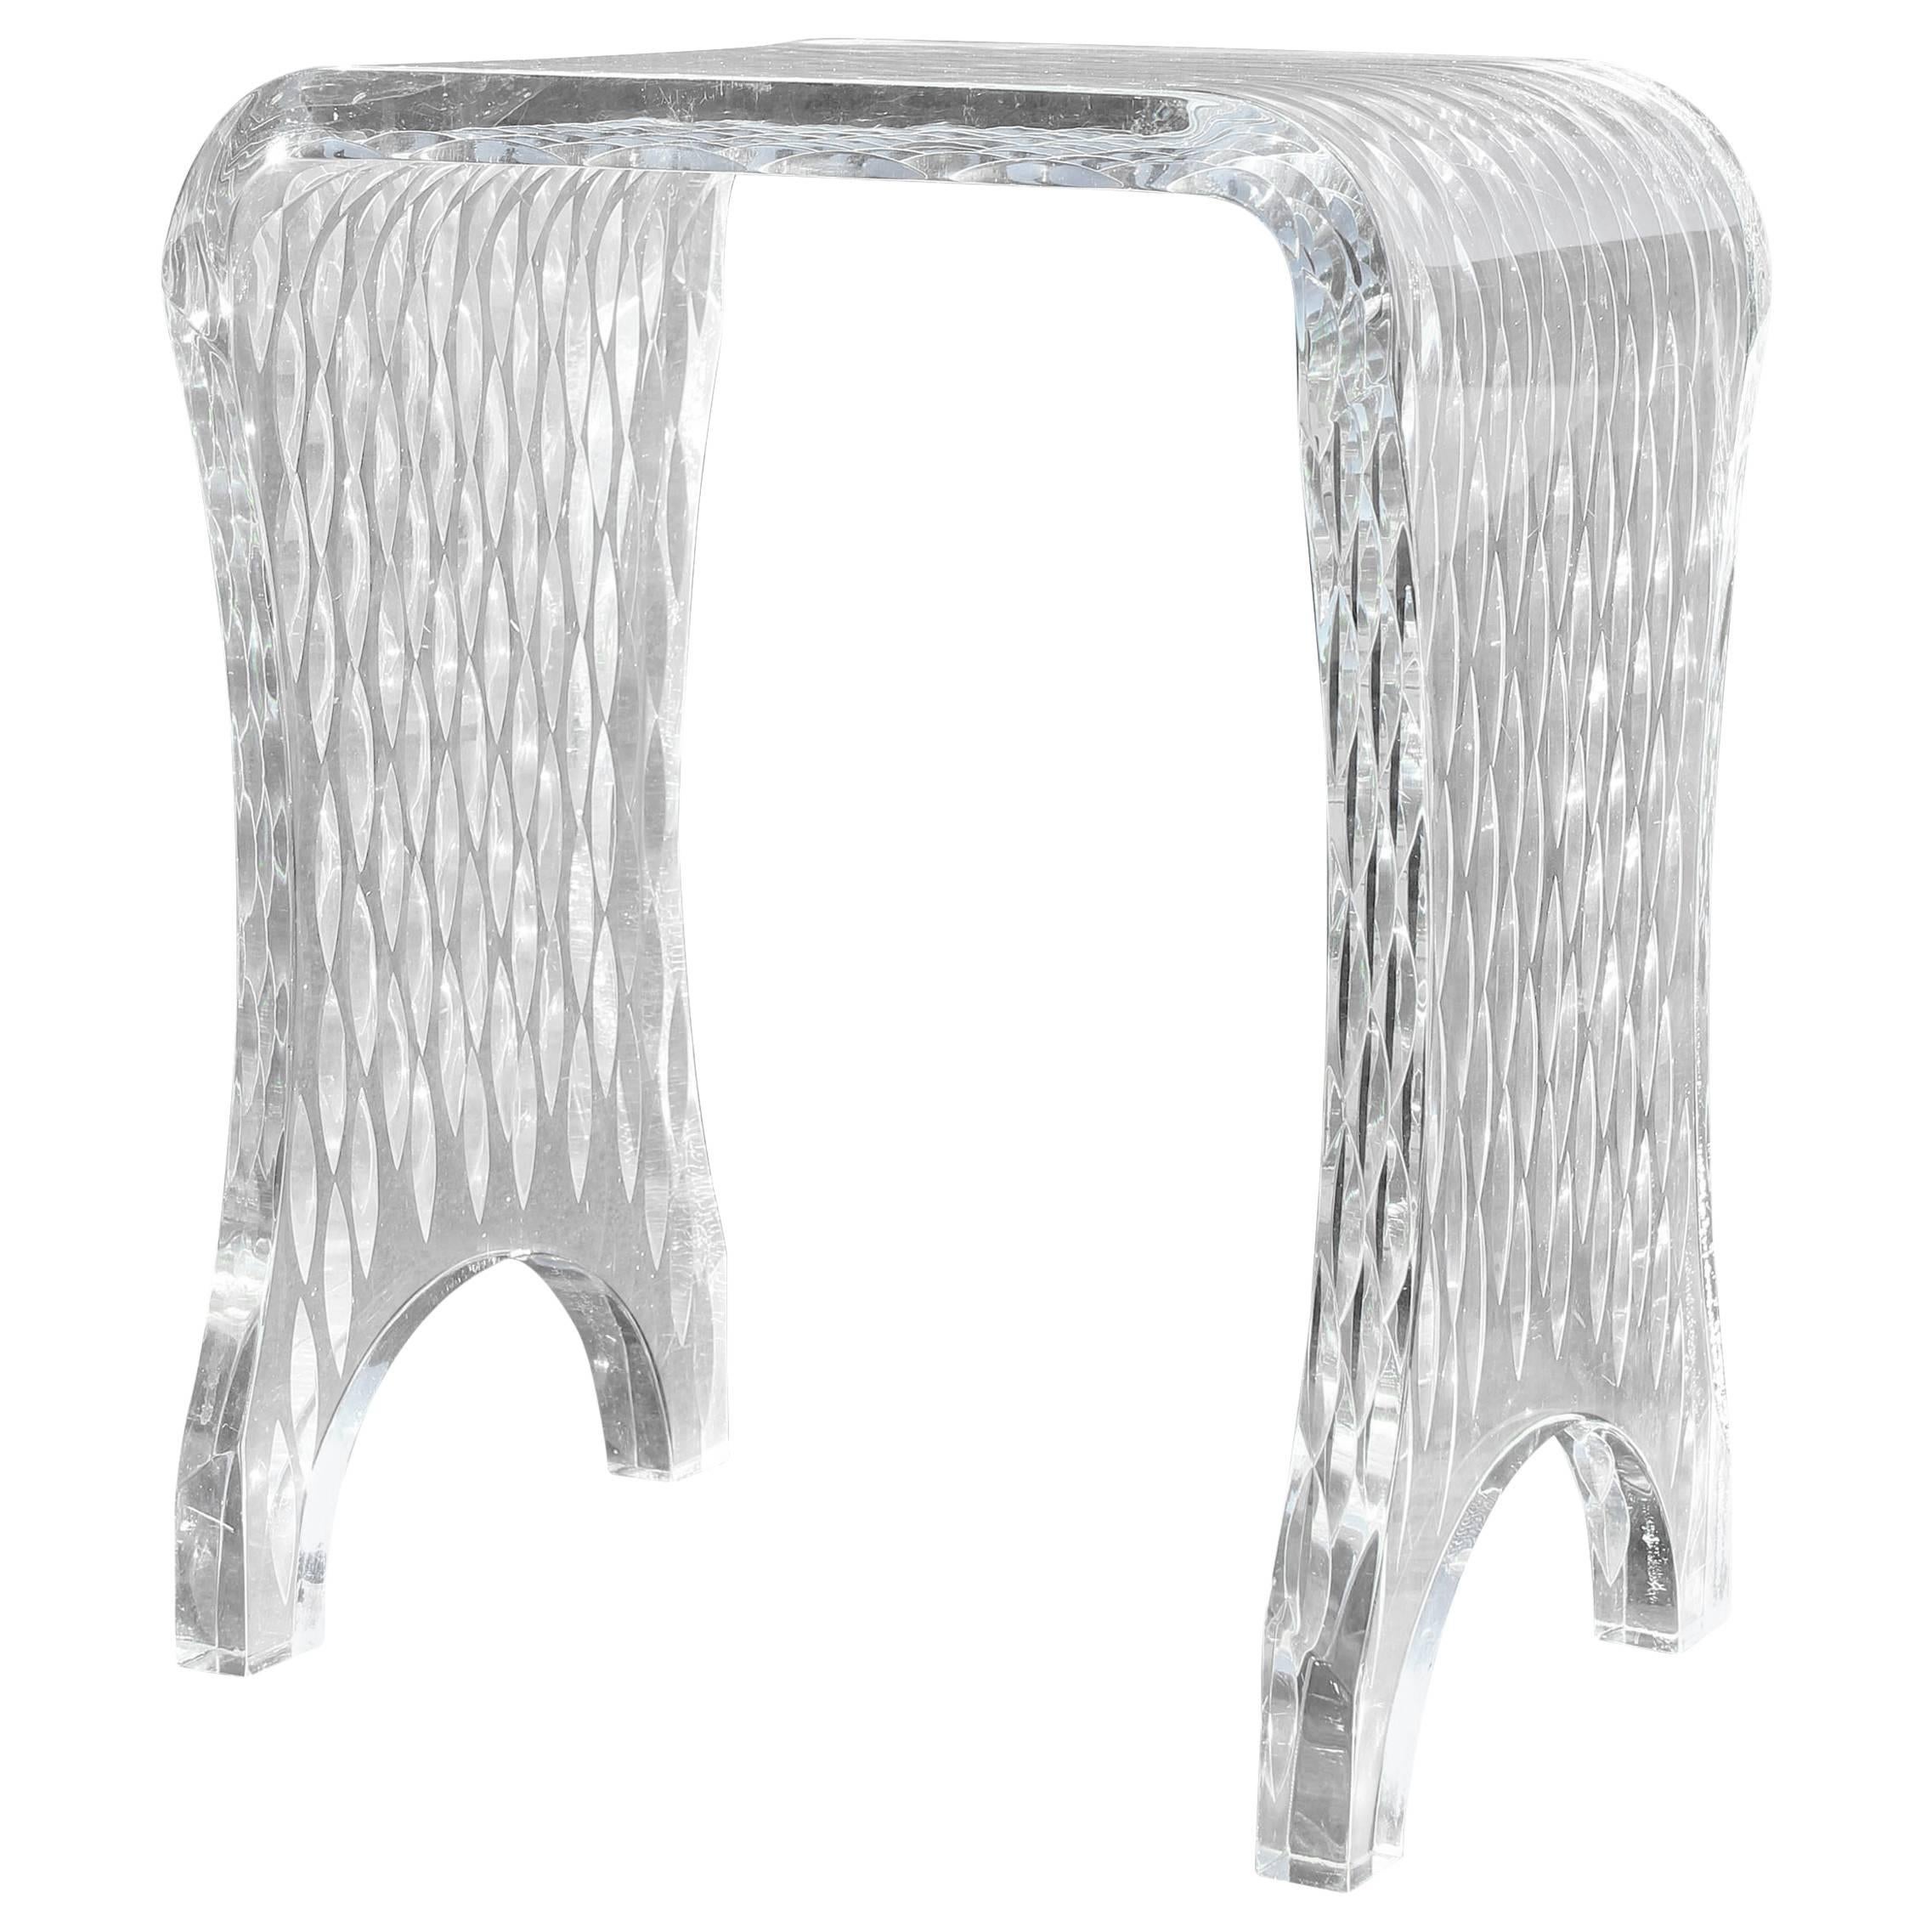  Lucite Bench